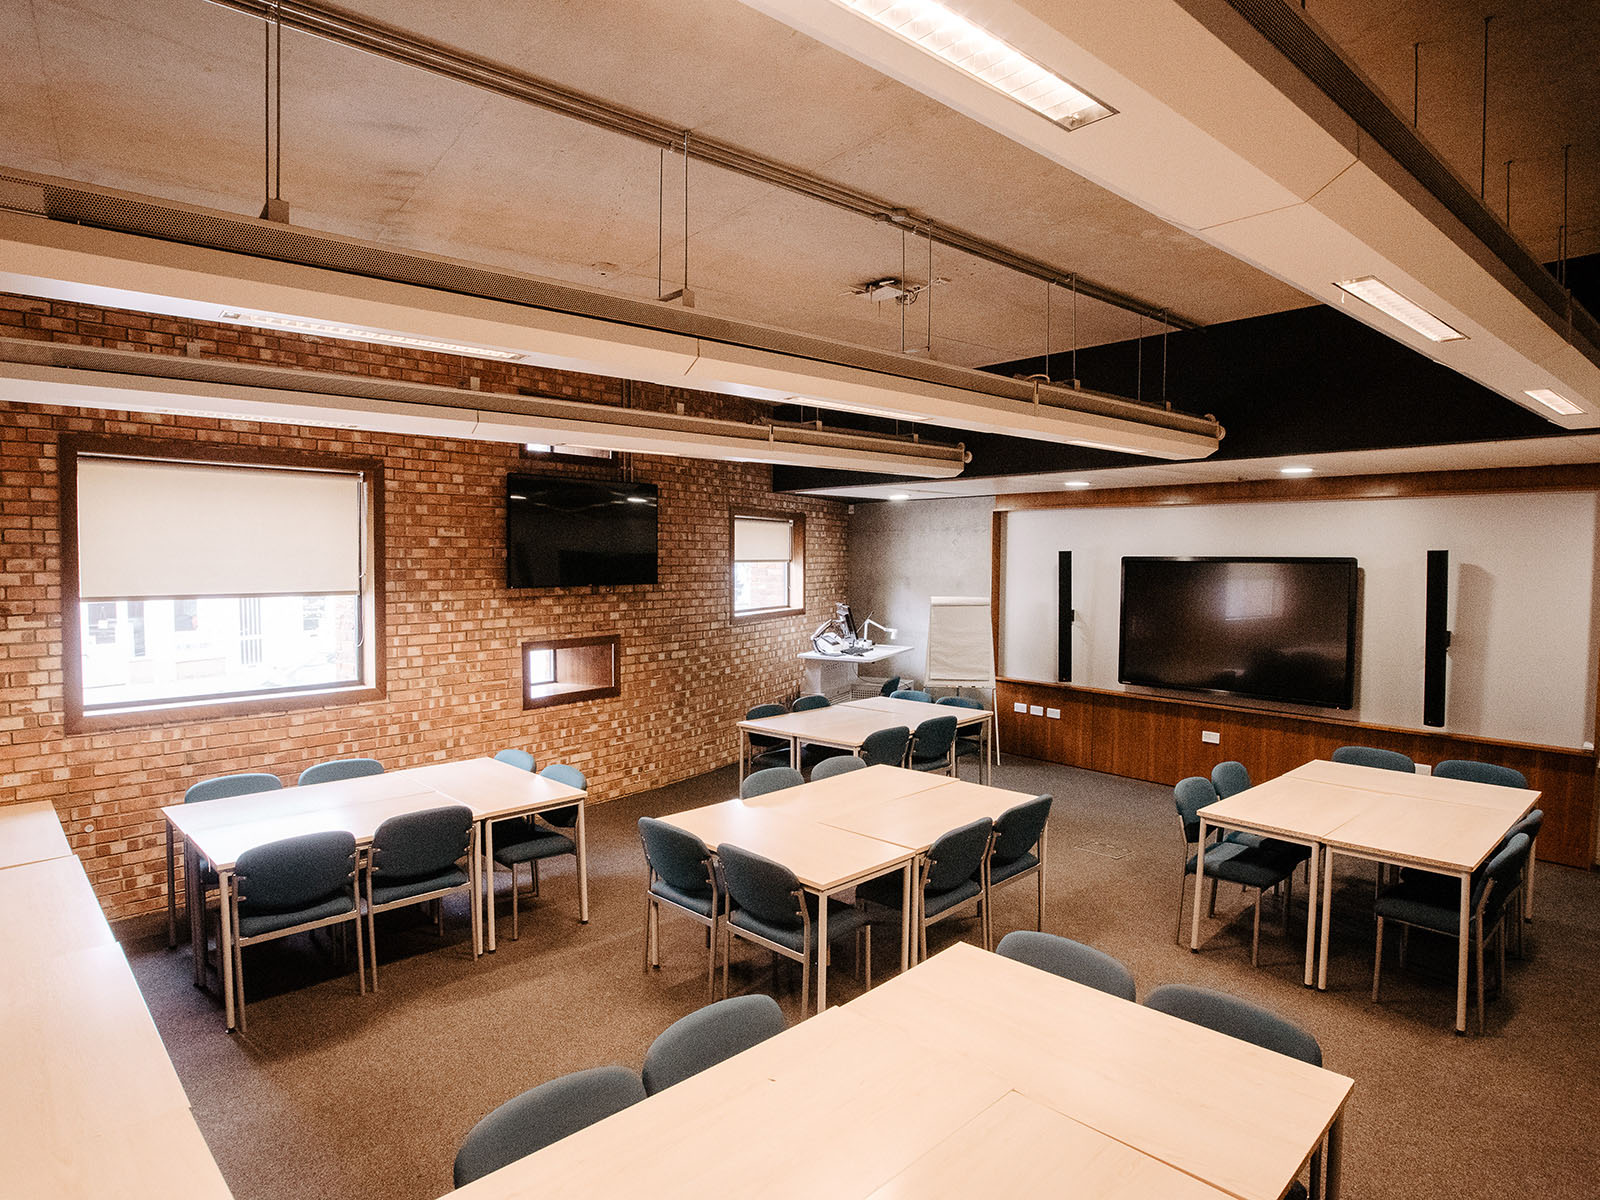 A classroom featuring a lectern, presentation screens, speakers, a flip chart, and reconfigurable desks with space for around 30 chairs